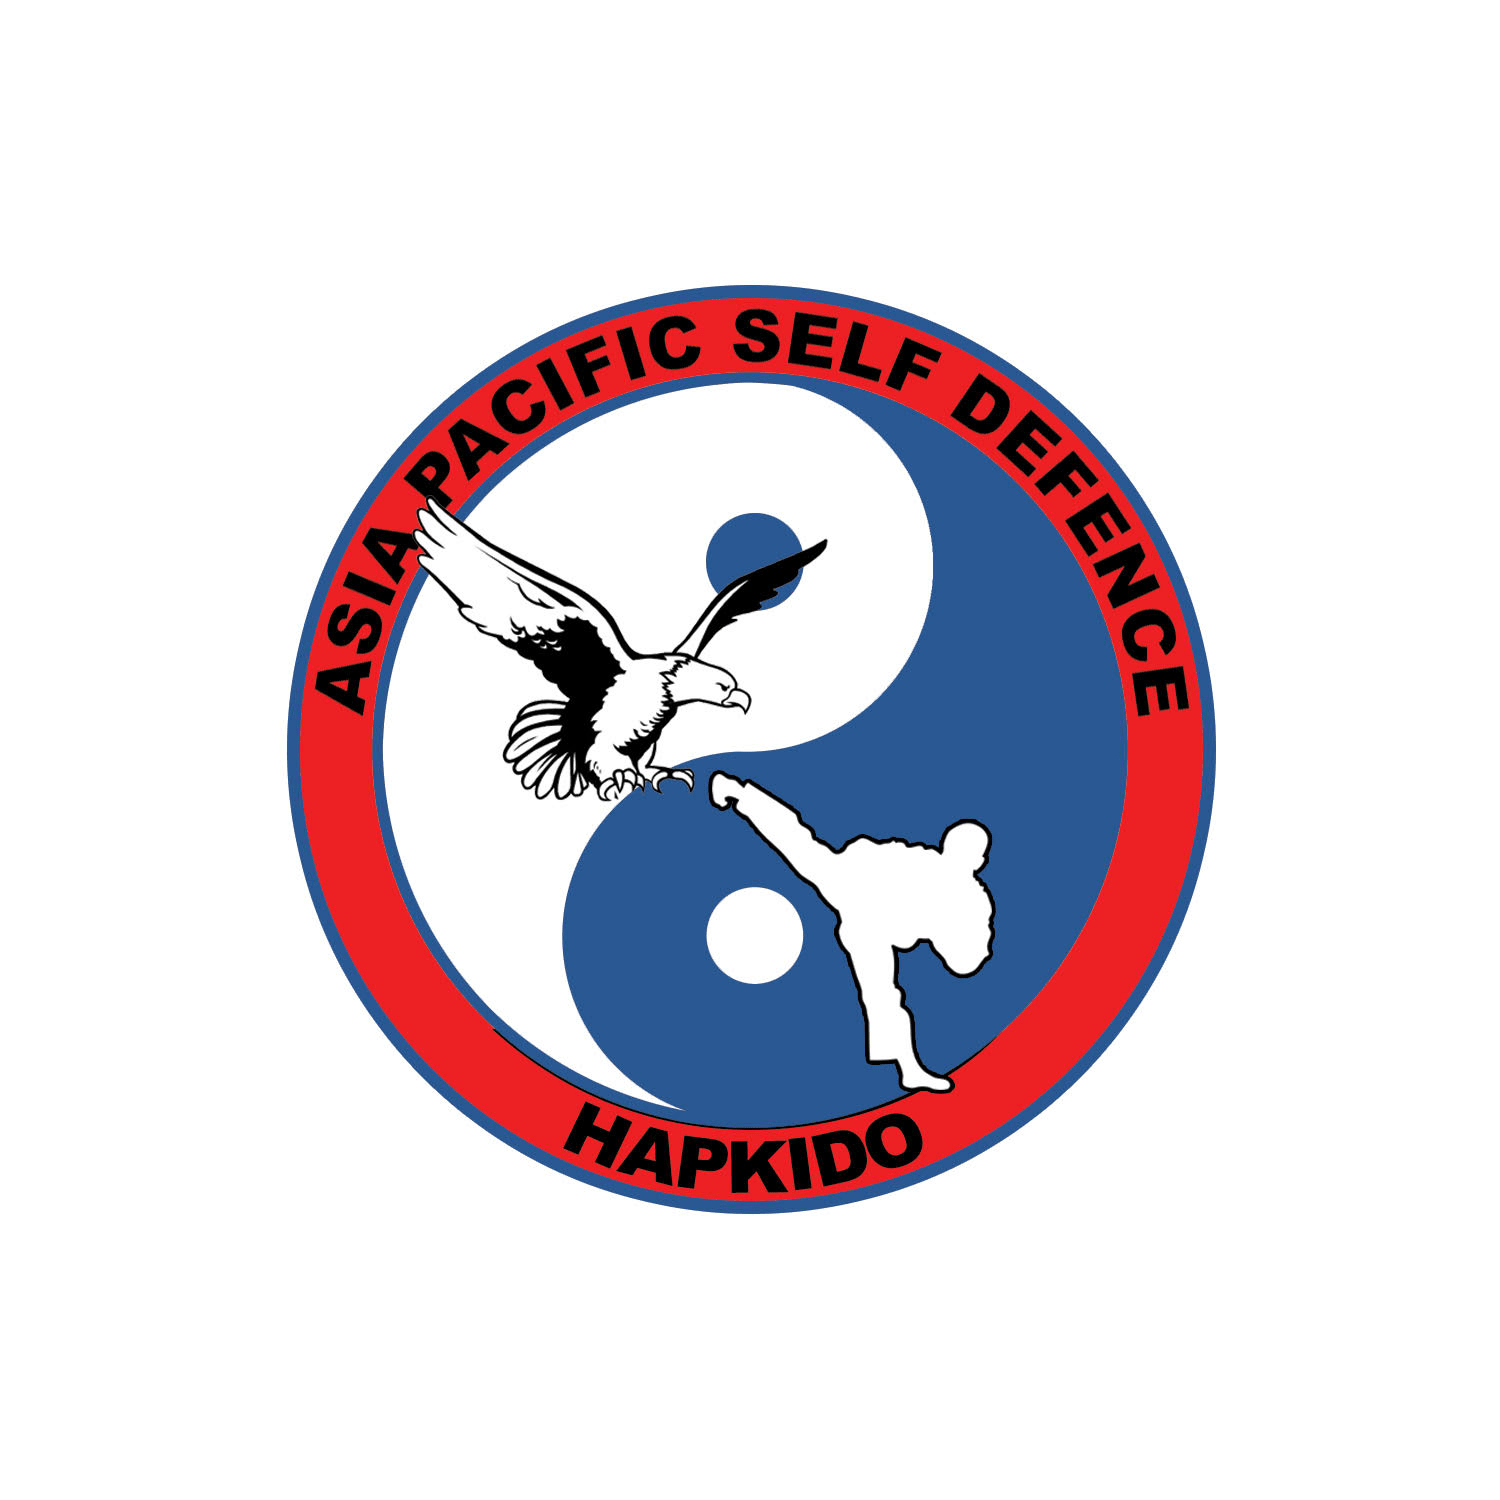 Red Ring Logo - Apsd Hapkido Logo White Background With Red Ring Pacific Self